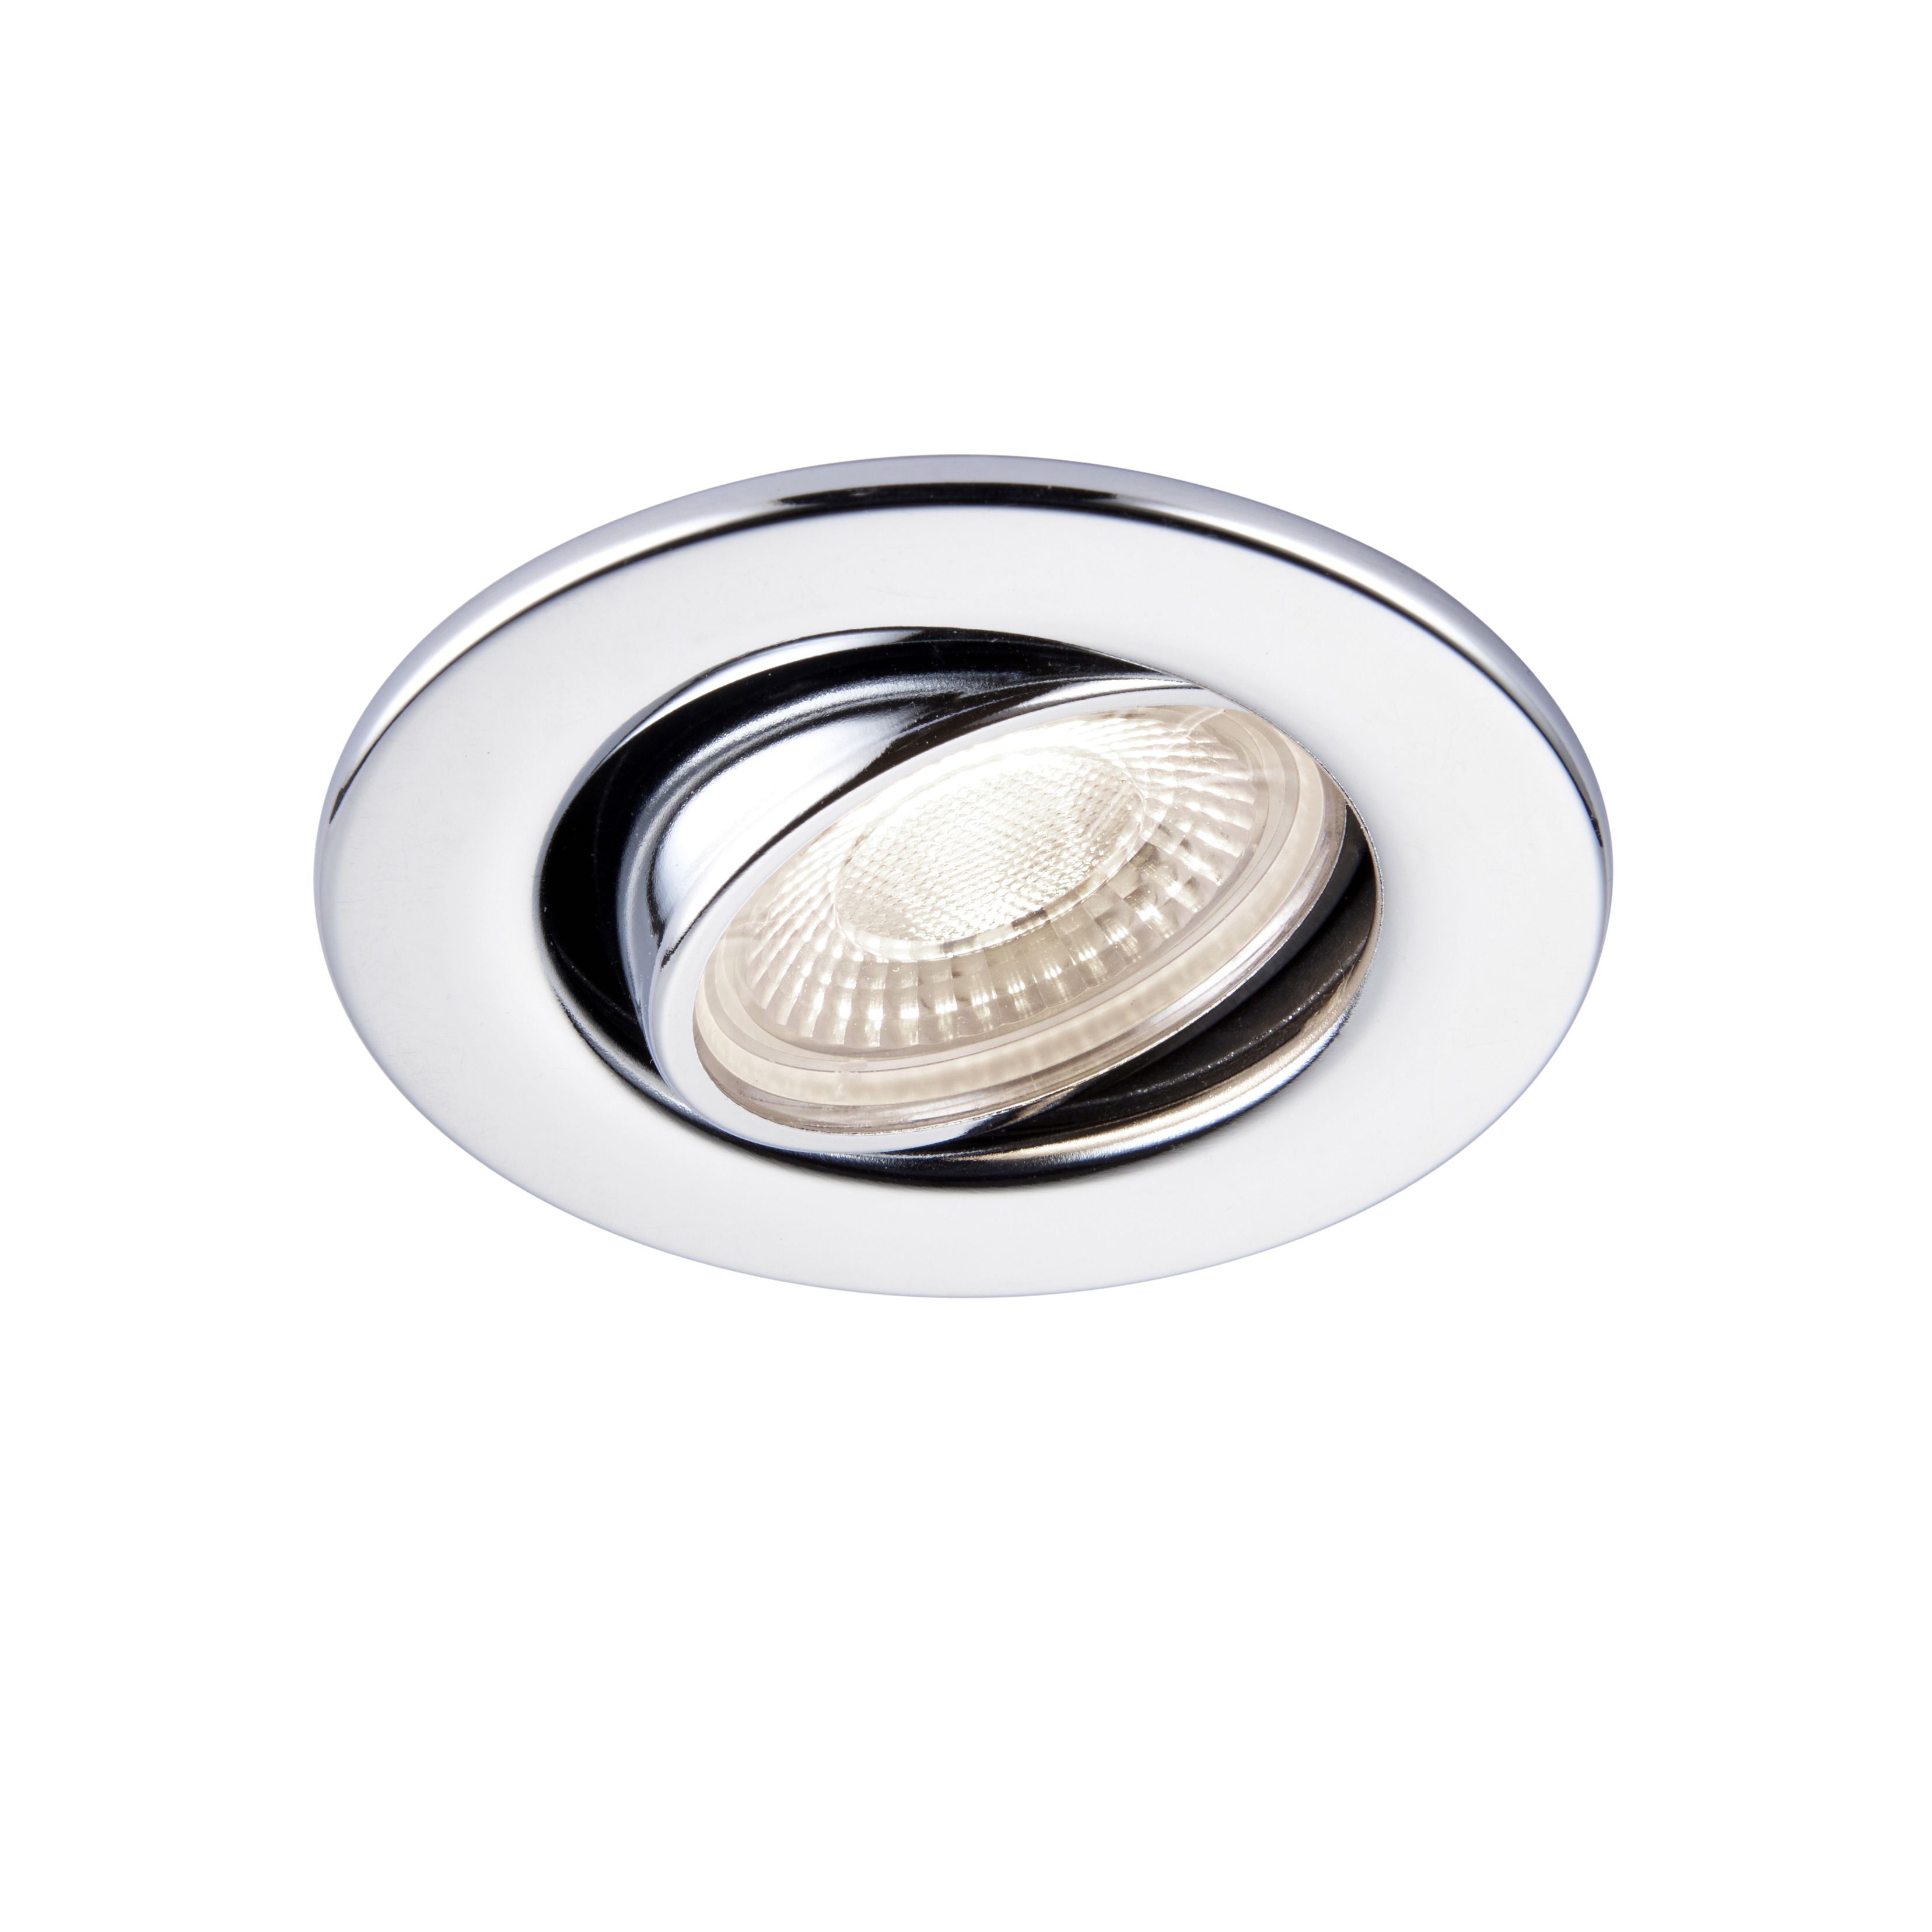 GuardECO Chrome effect Adjustable LED Cool white Downlight 6W IP20